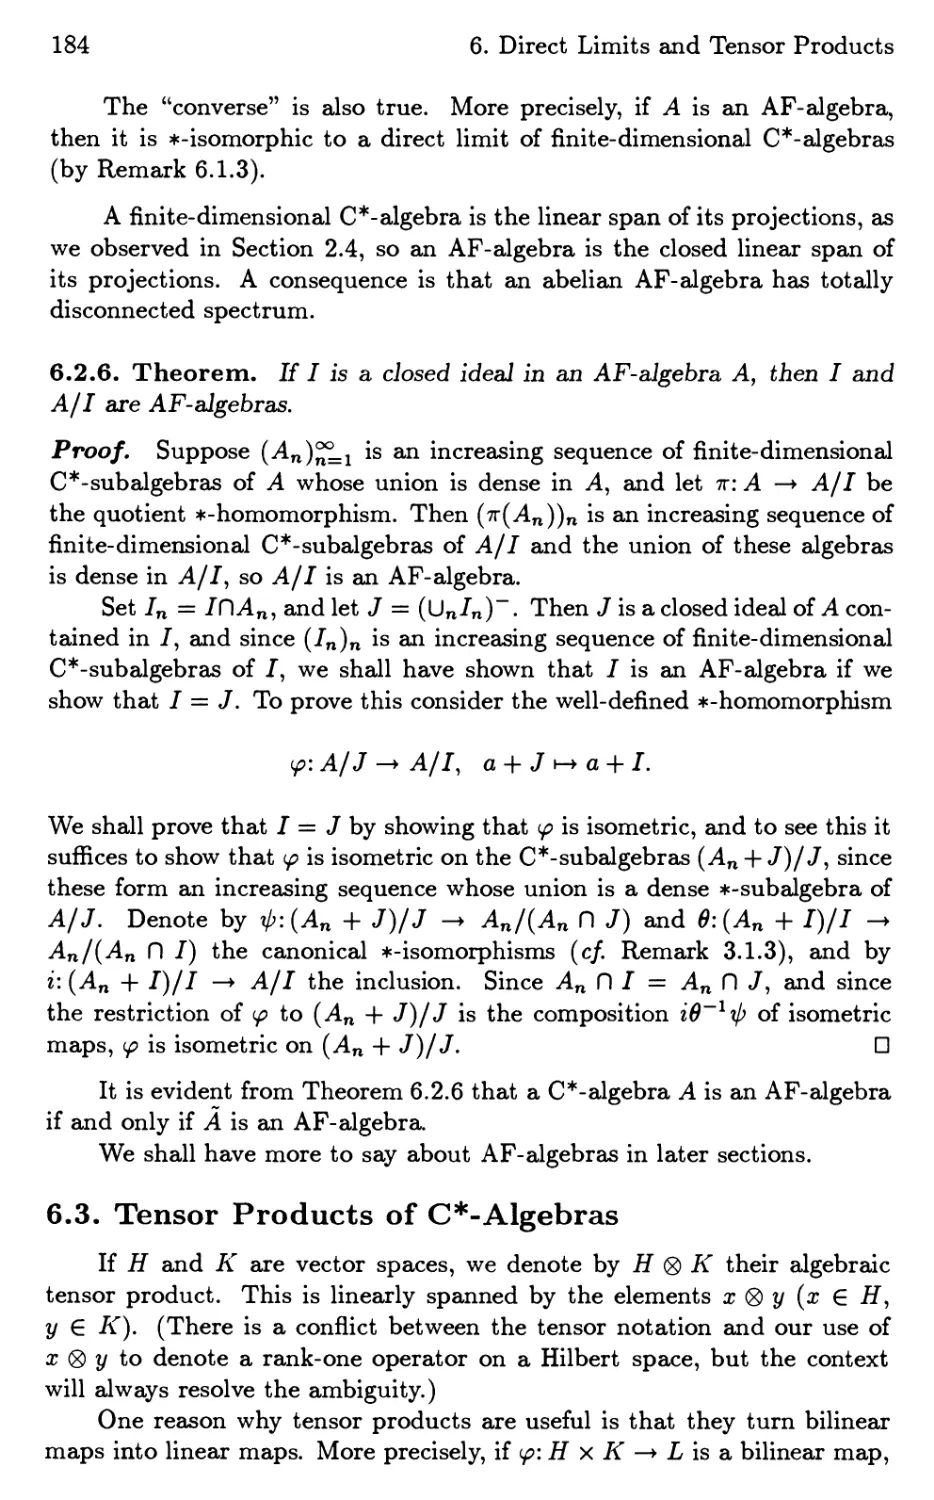 6.3. Tensor Products of C$^\ast$-Algebras